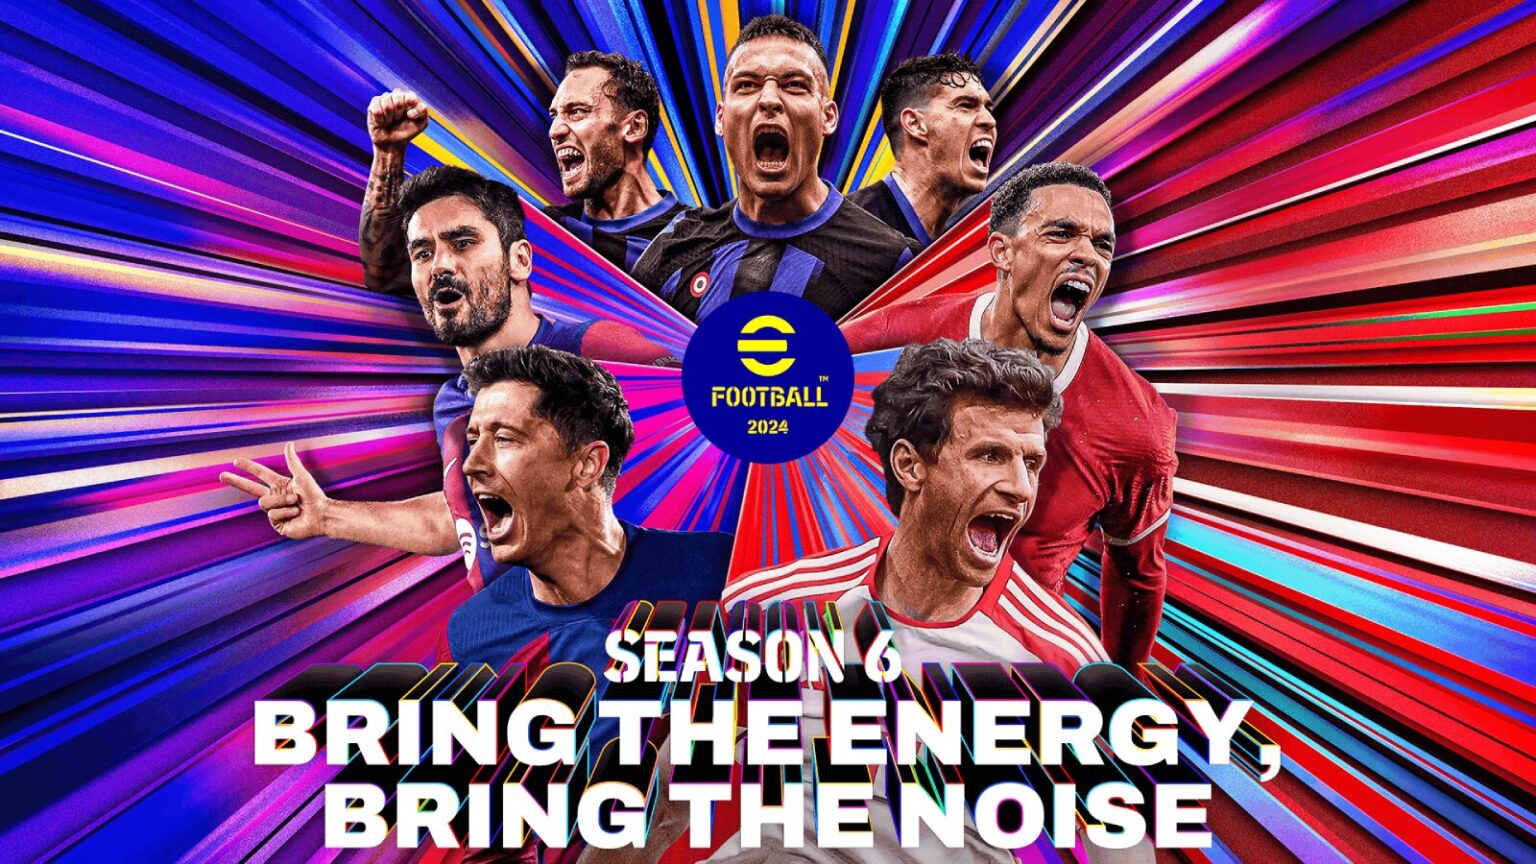 eFootball 2024 Season 6 update ignites with vibrant, energetic player imagery